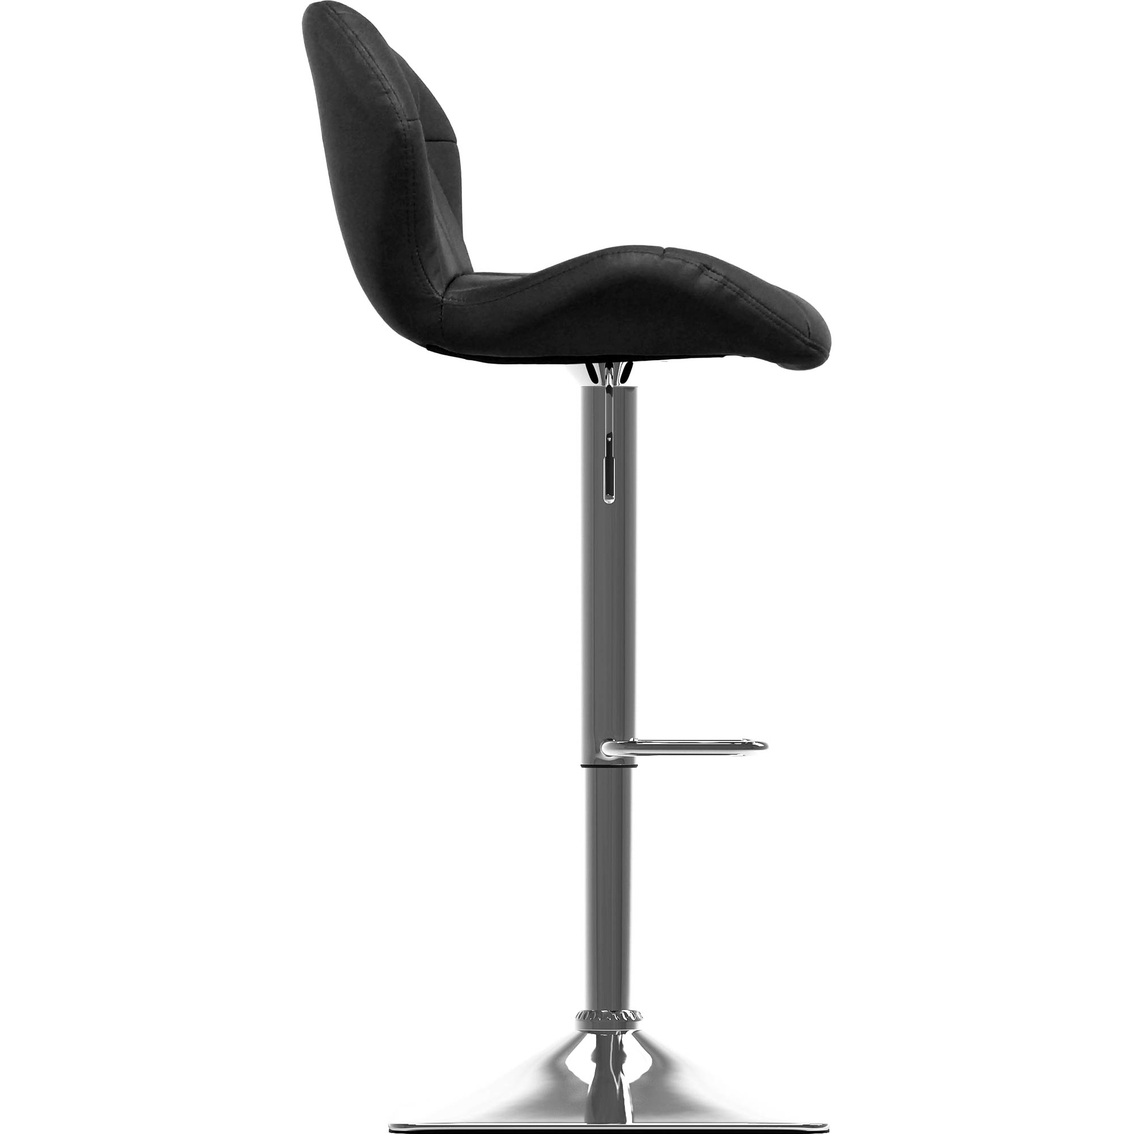 CorLiving Adjustable Barstool in Bonded Leather 2 Pk. - Image 3 of 4